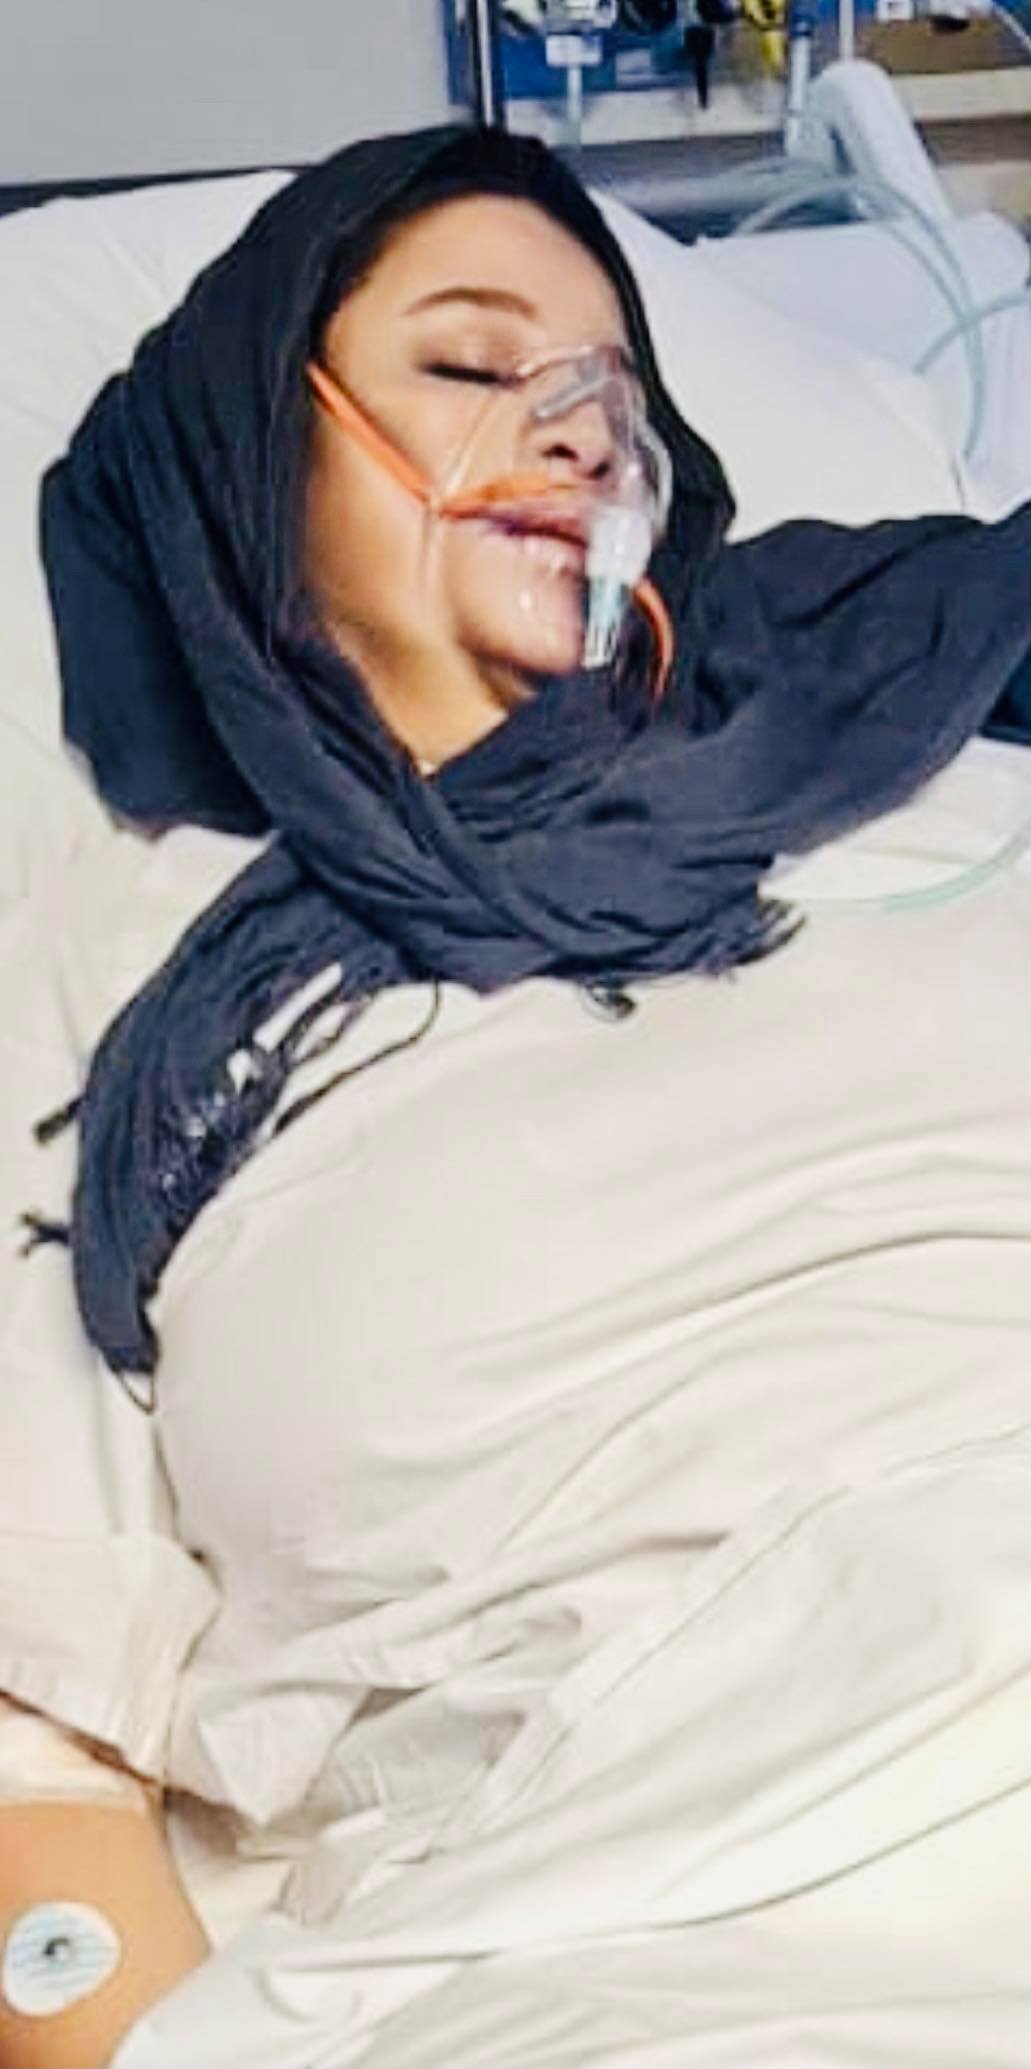 Shaharazaad Gafoor in hospital recovering from bird infection.